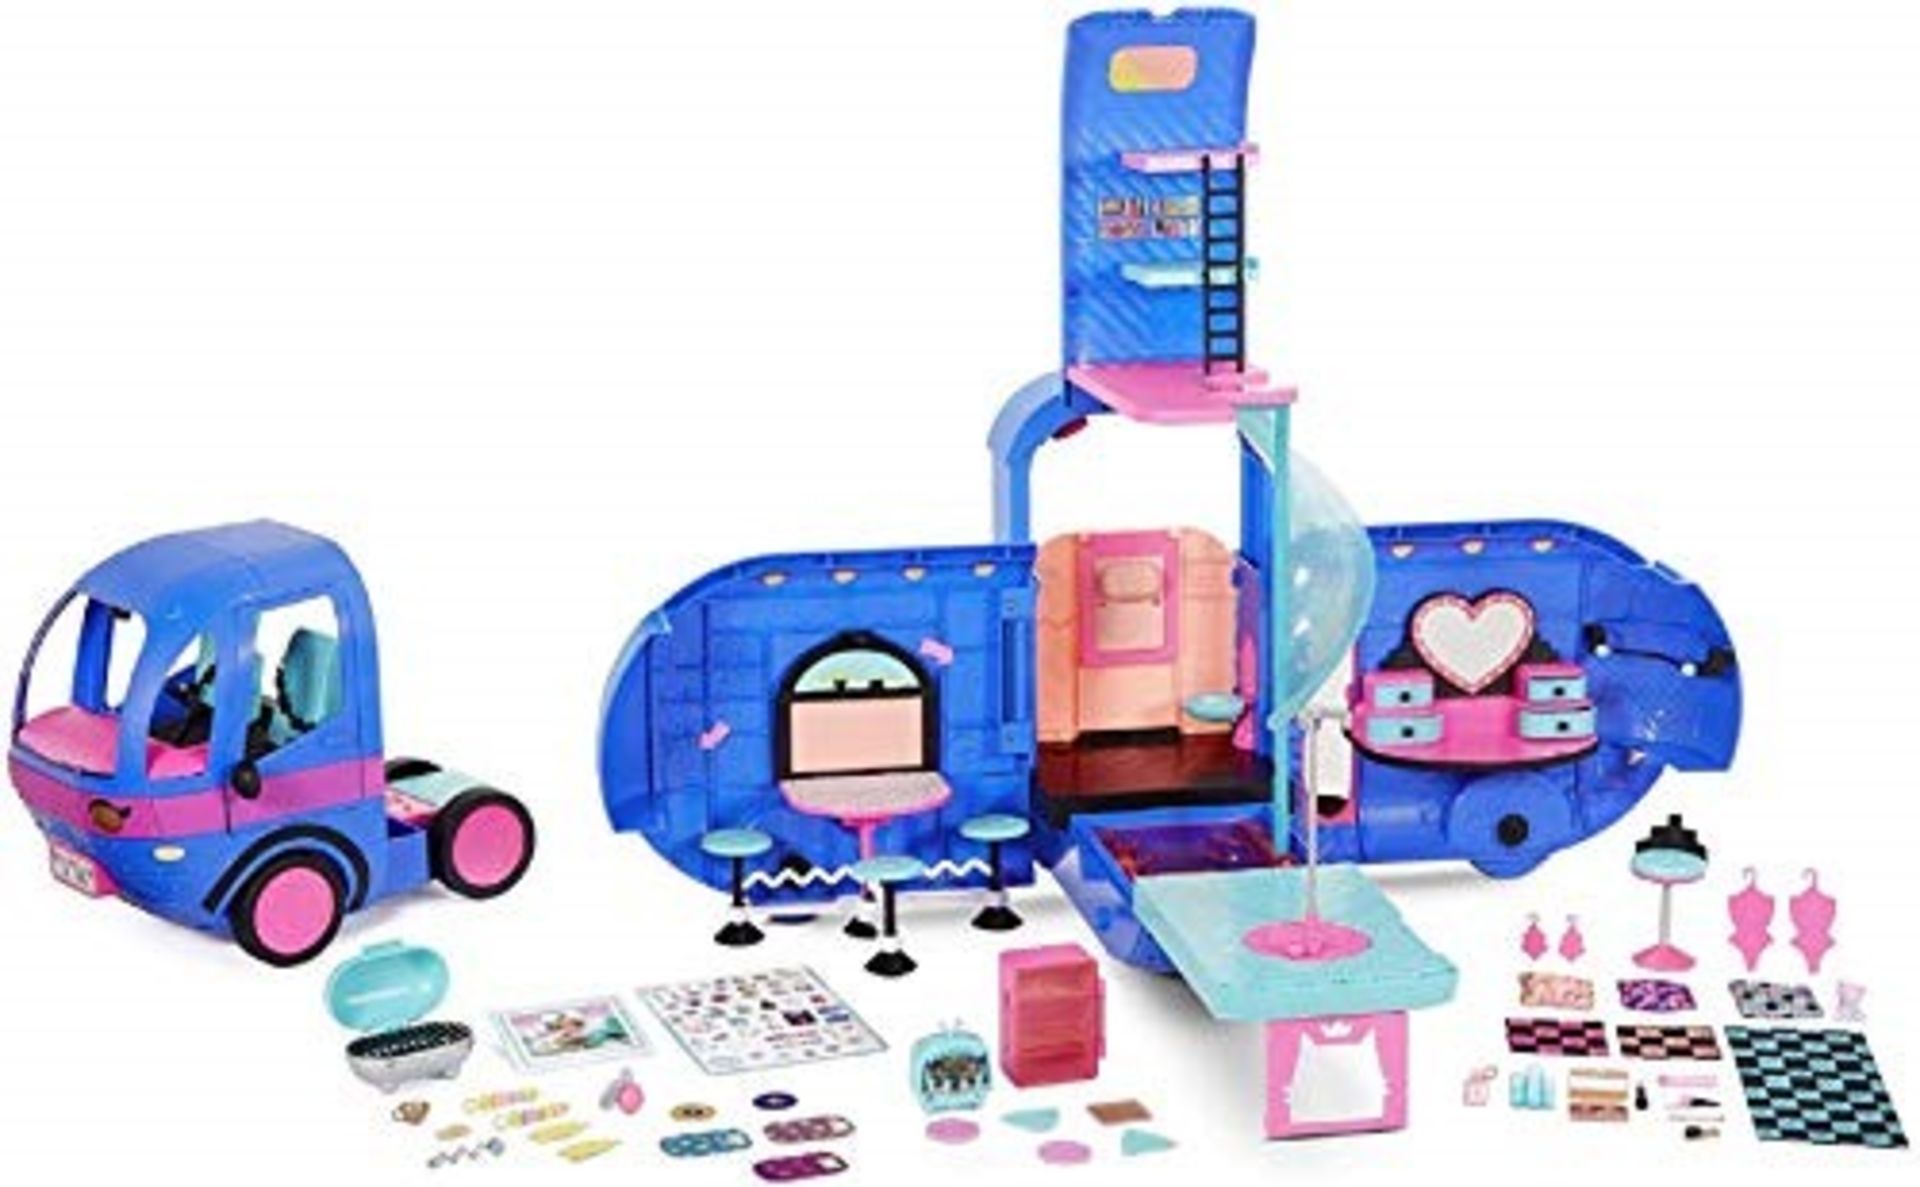 RRP £79.00 LOL Surprise 4-in-1 Glamper Fashion Camper - With 55+ Surprises, 10+ Hangout Areas and